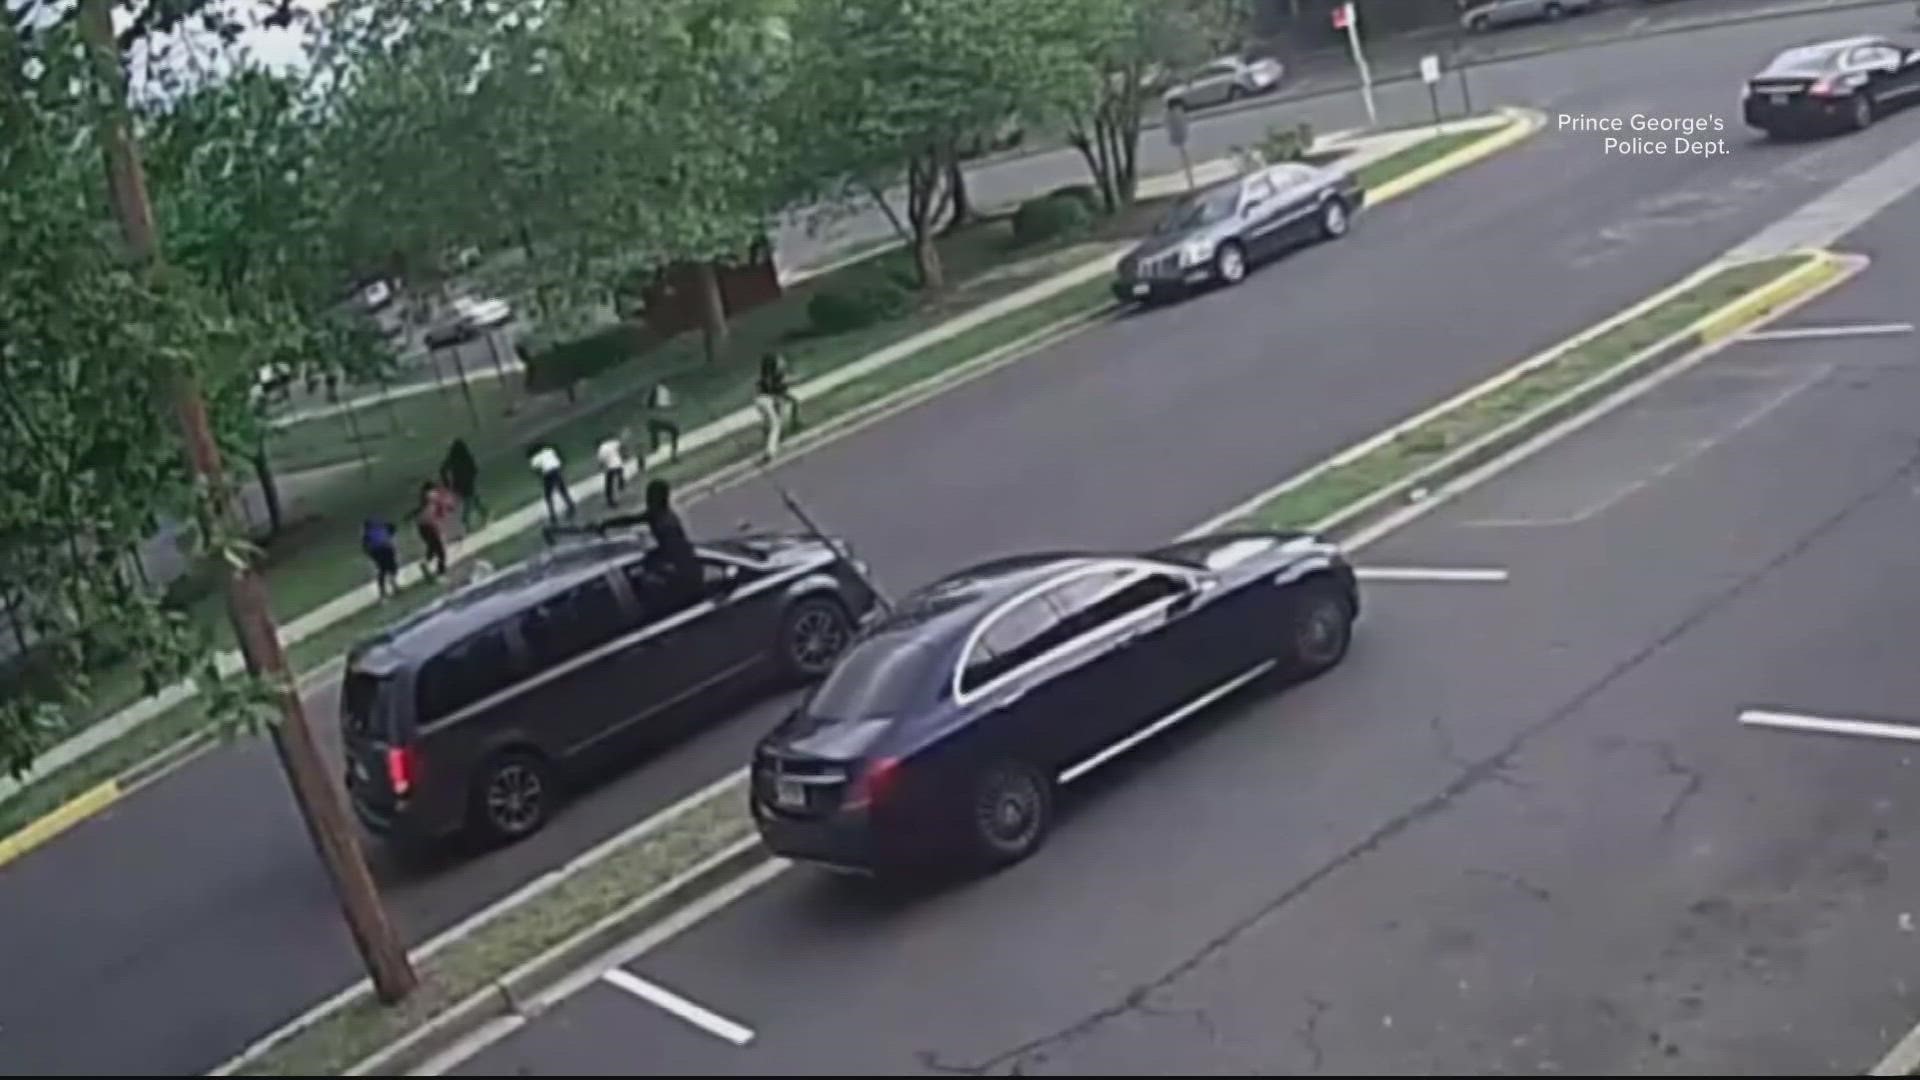 Prince George's County Police released a video showing gunmen shooting from two vehicles at a group of about 9 people. Two boys were injured and a dog died.